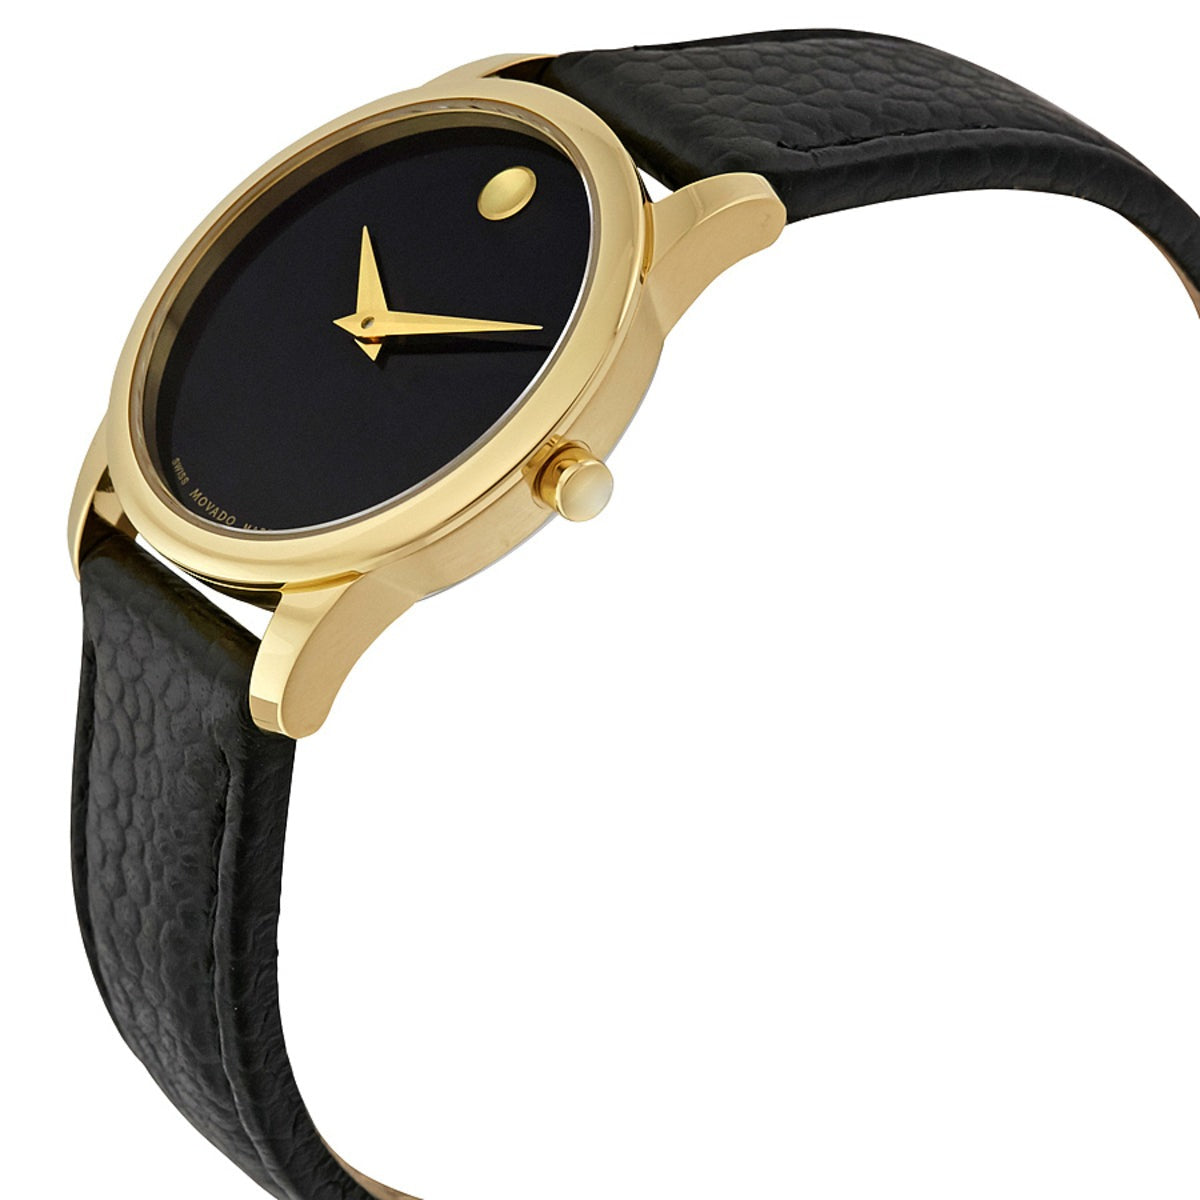 Movado Museum Classic Black Dial Black Leather Strap Watch For Women - 0607016